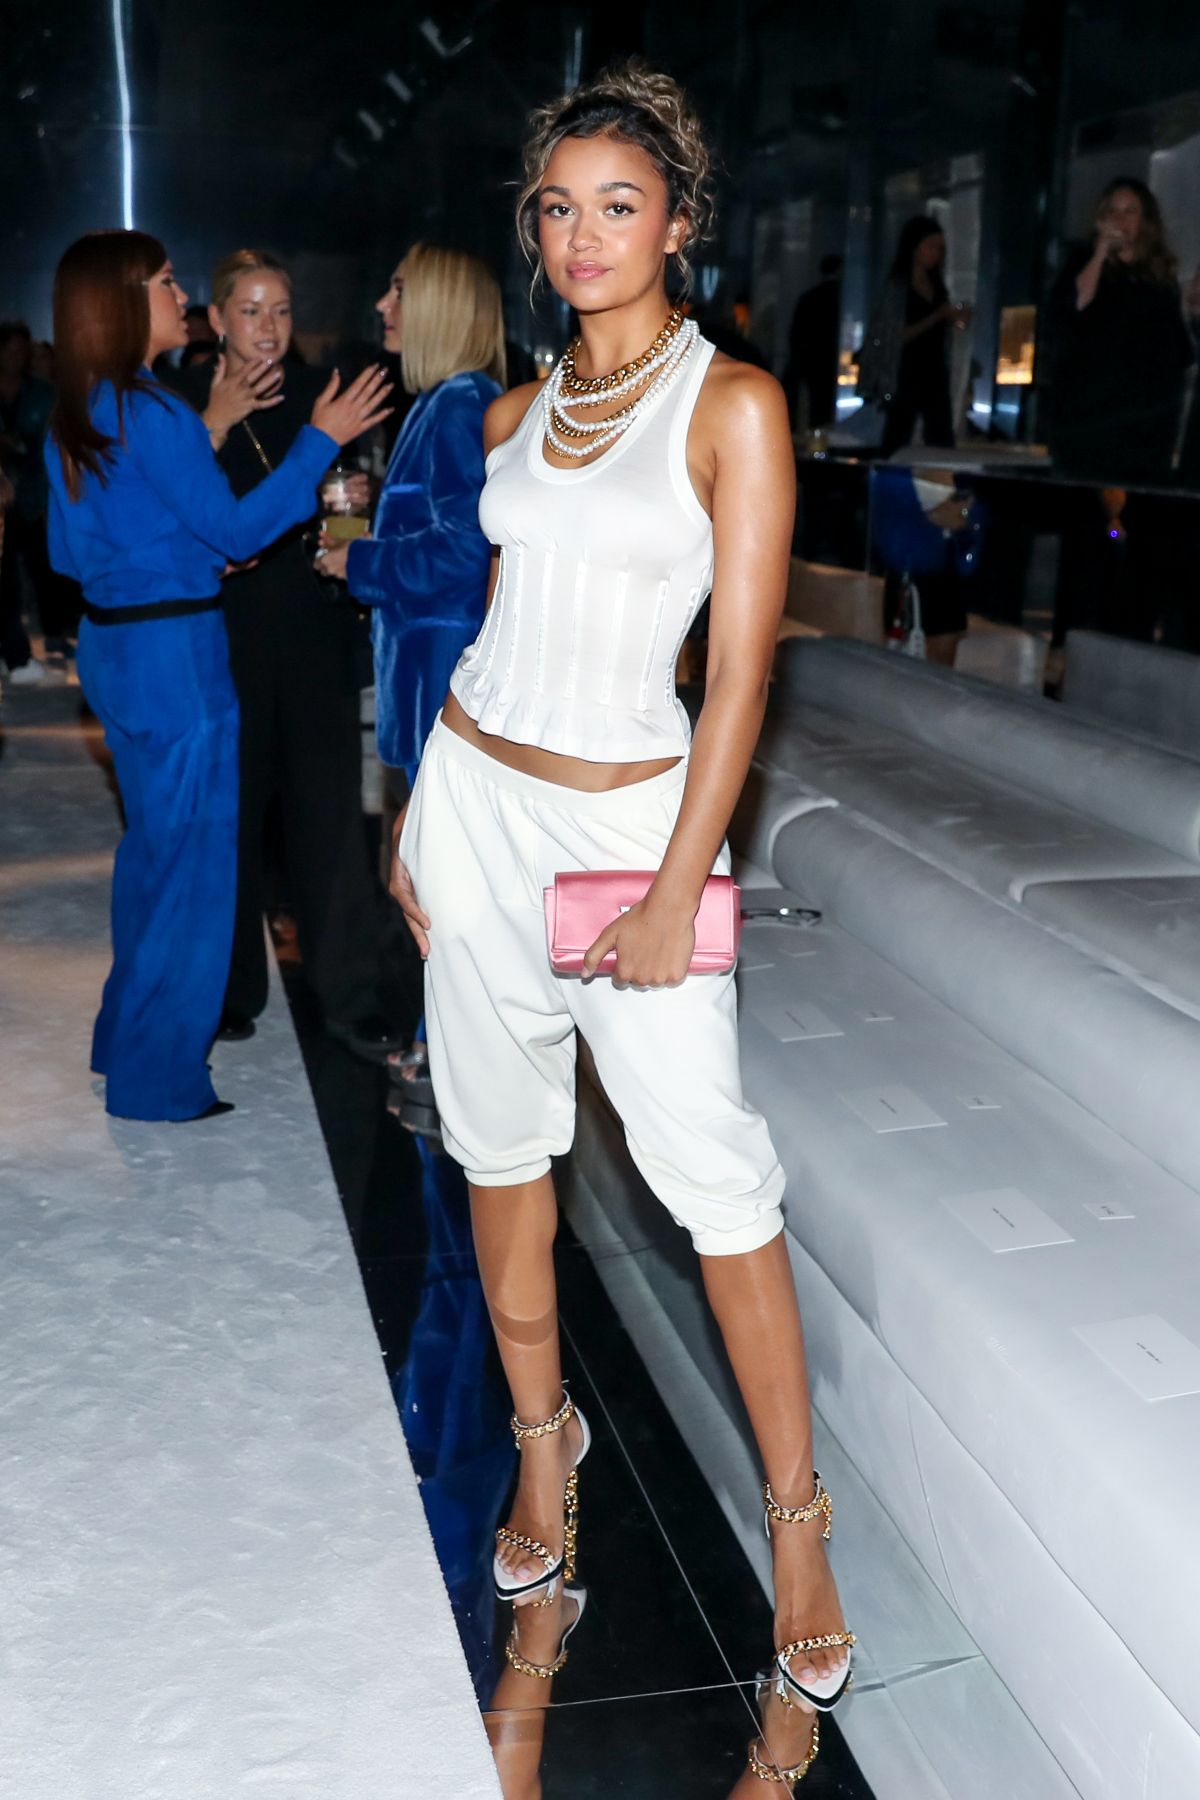 Madison Bailey seen in Beautiful Outfit at Tom Ford SS23 Runway Show in New York, Sep 2022 1